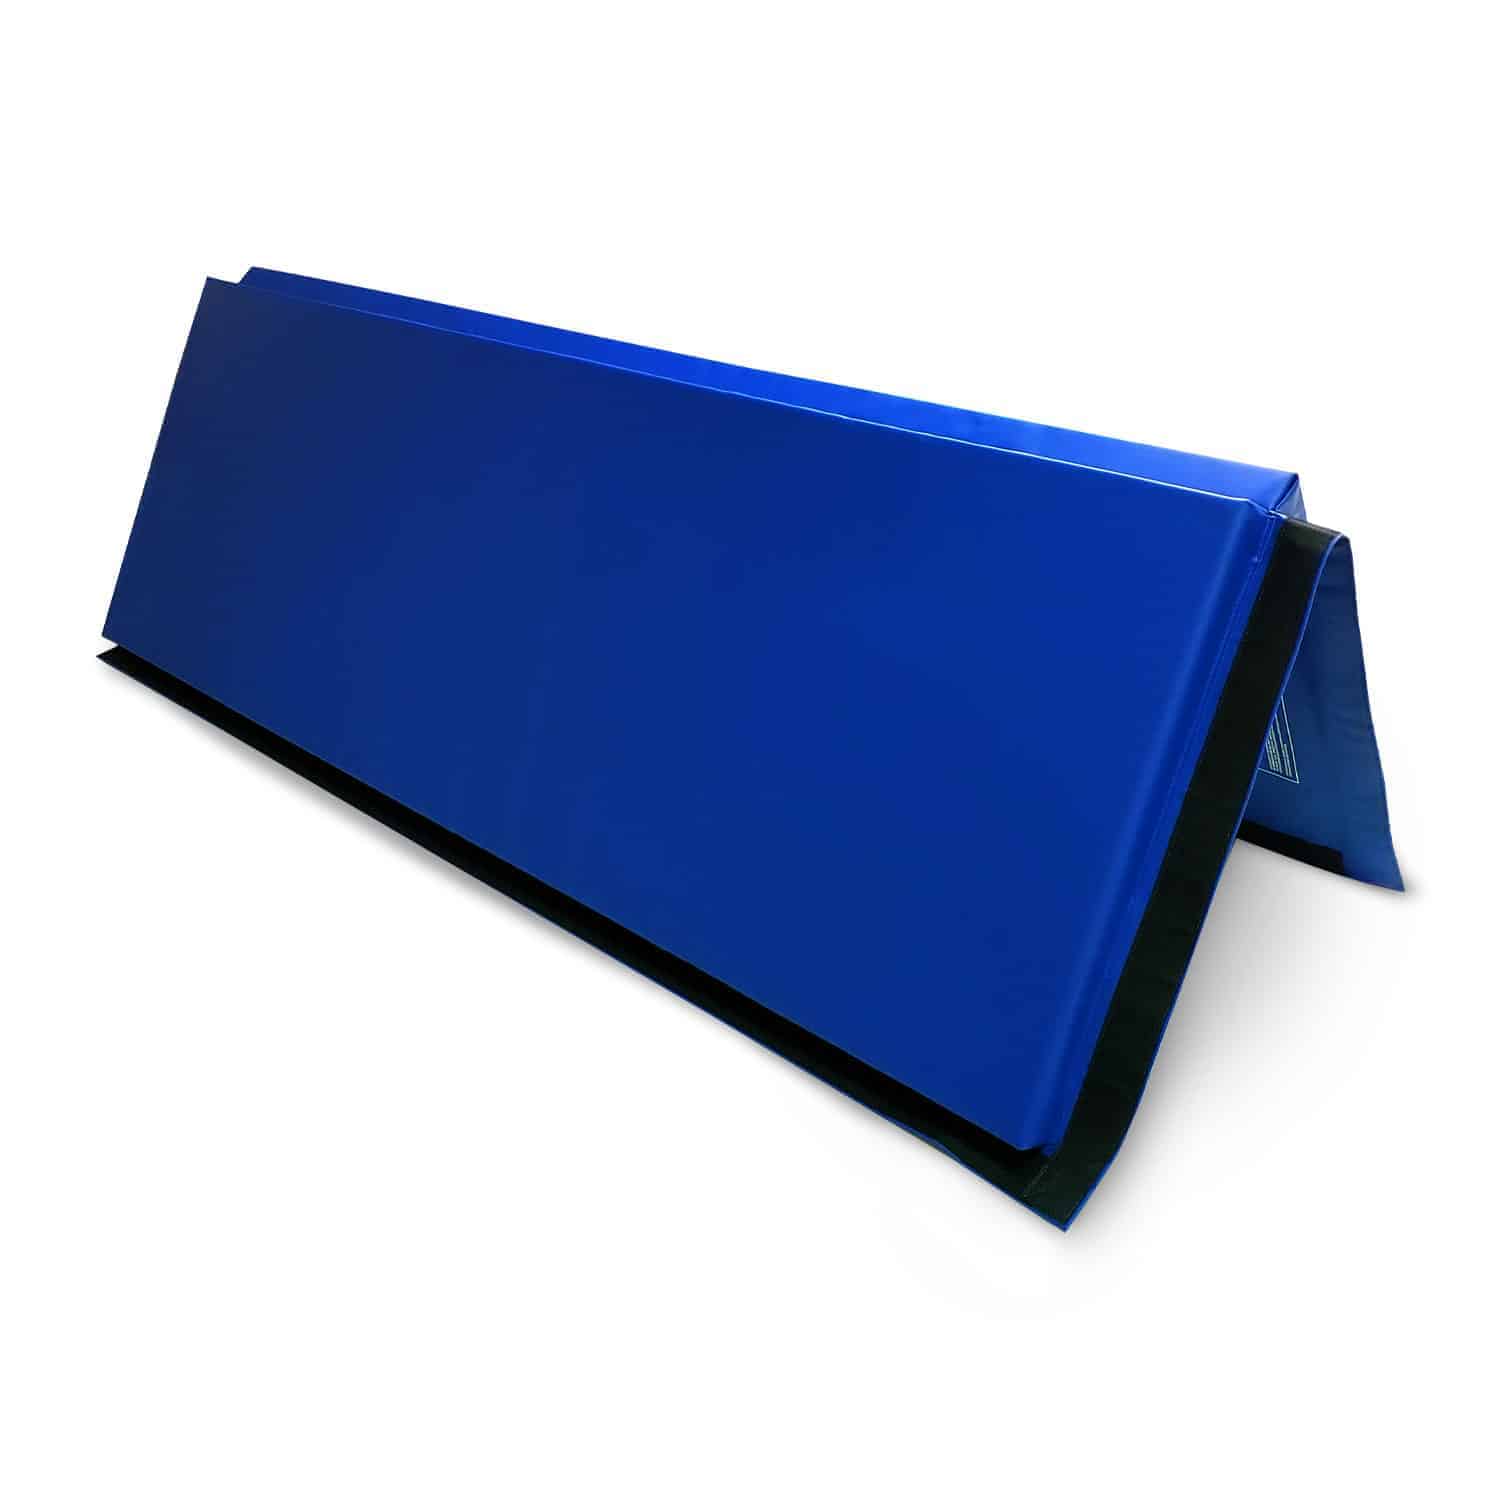 4' Tall x 8' Wide x 2 Thick Removable Folding Gym Wall Pad